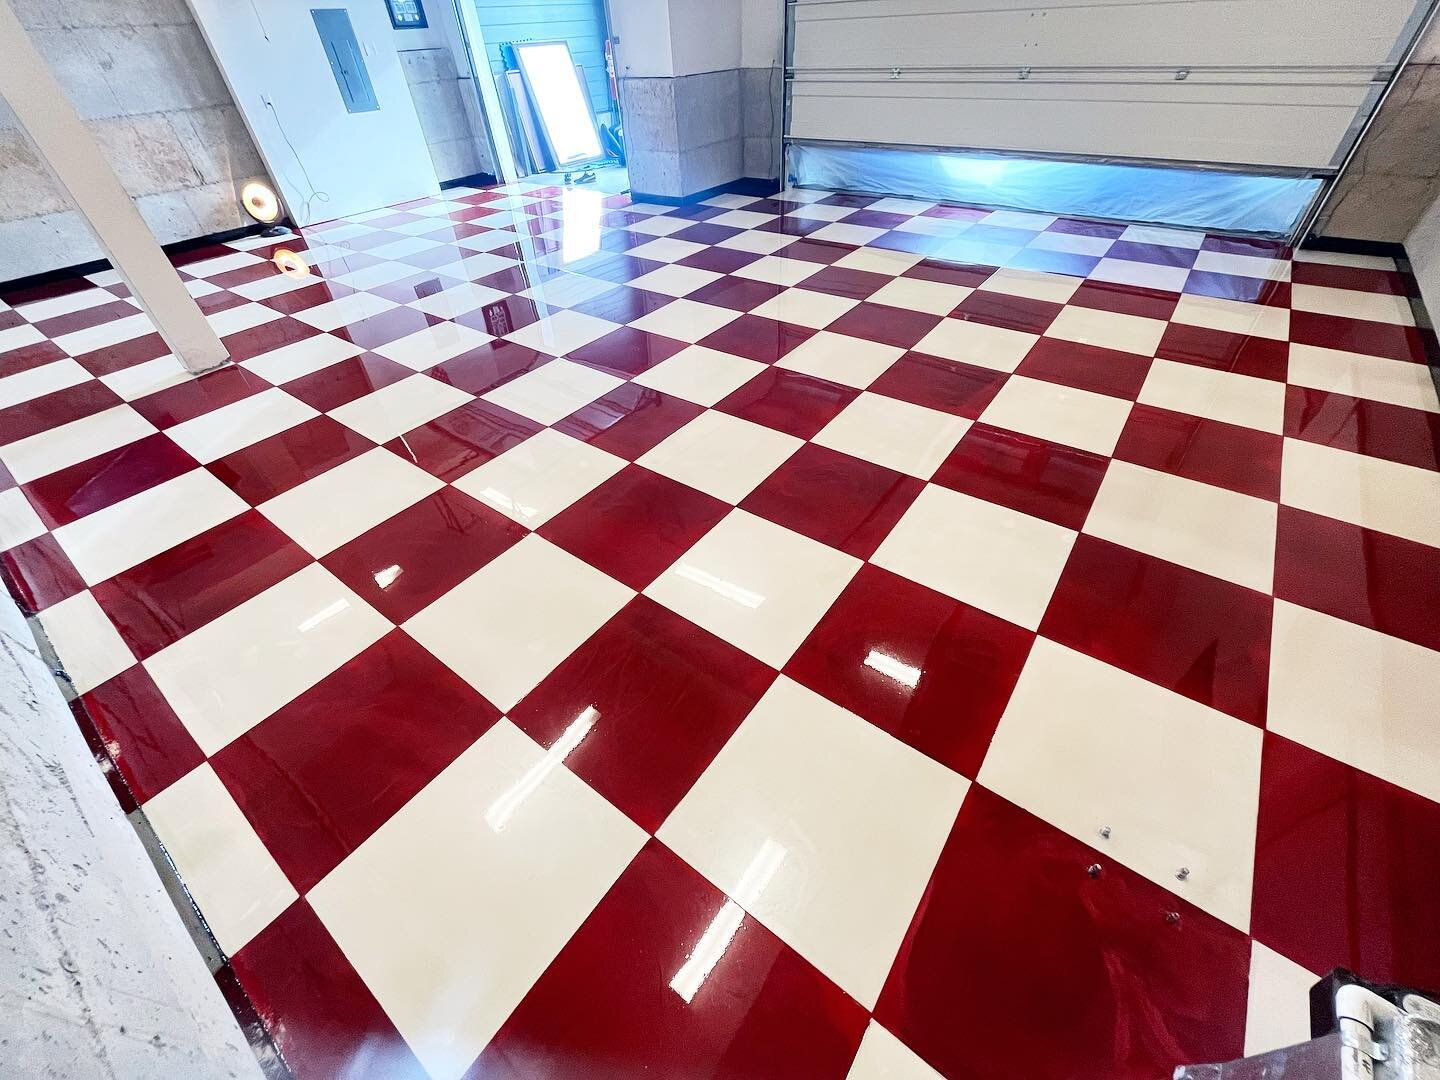 Trust the process and let us help you turn your ideas into a reality!

A 700 sqft. garage was transformed using the design of the Croatian crest and our Reflector Enhancer system. The natural marbling of this system creates a unique floor that is not